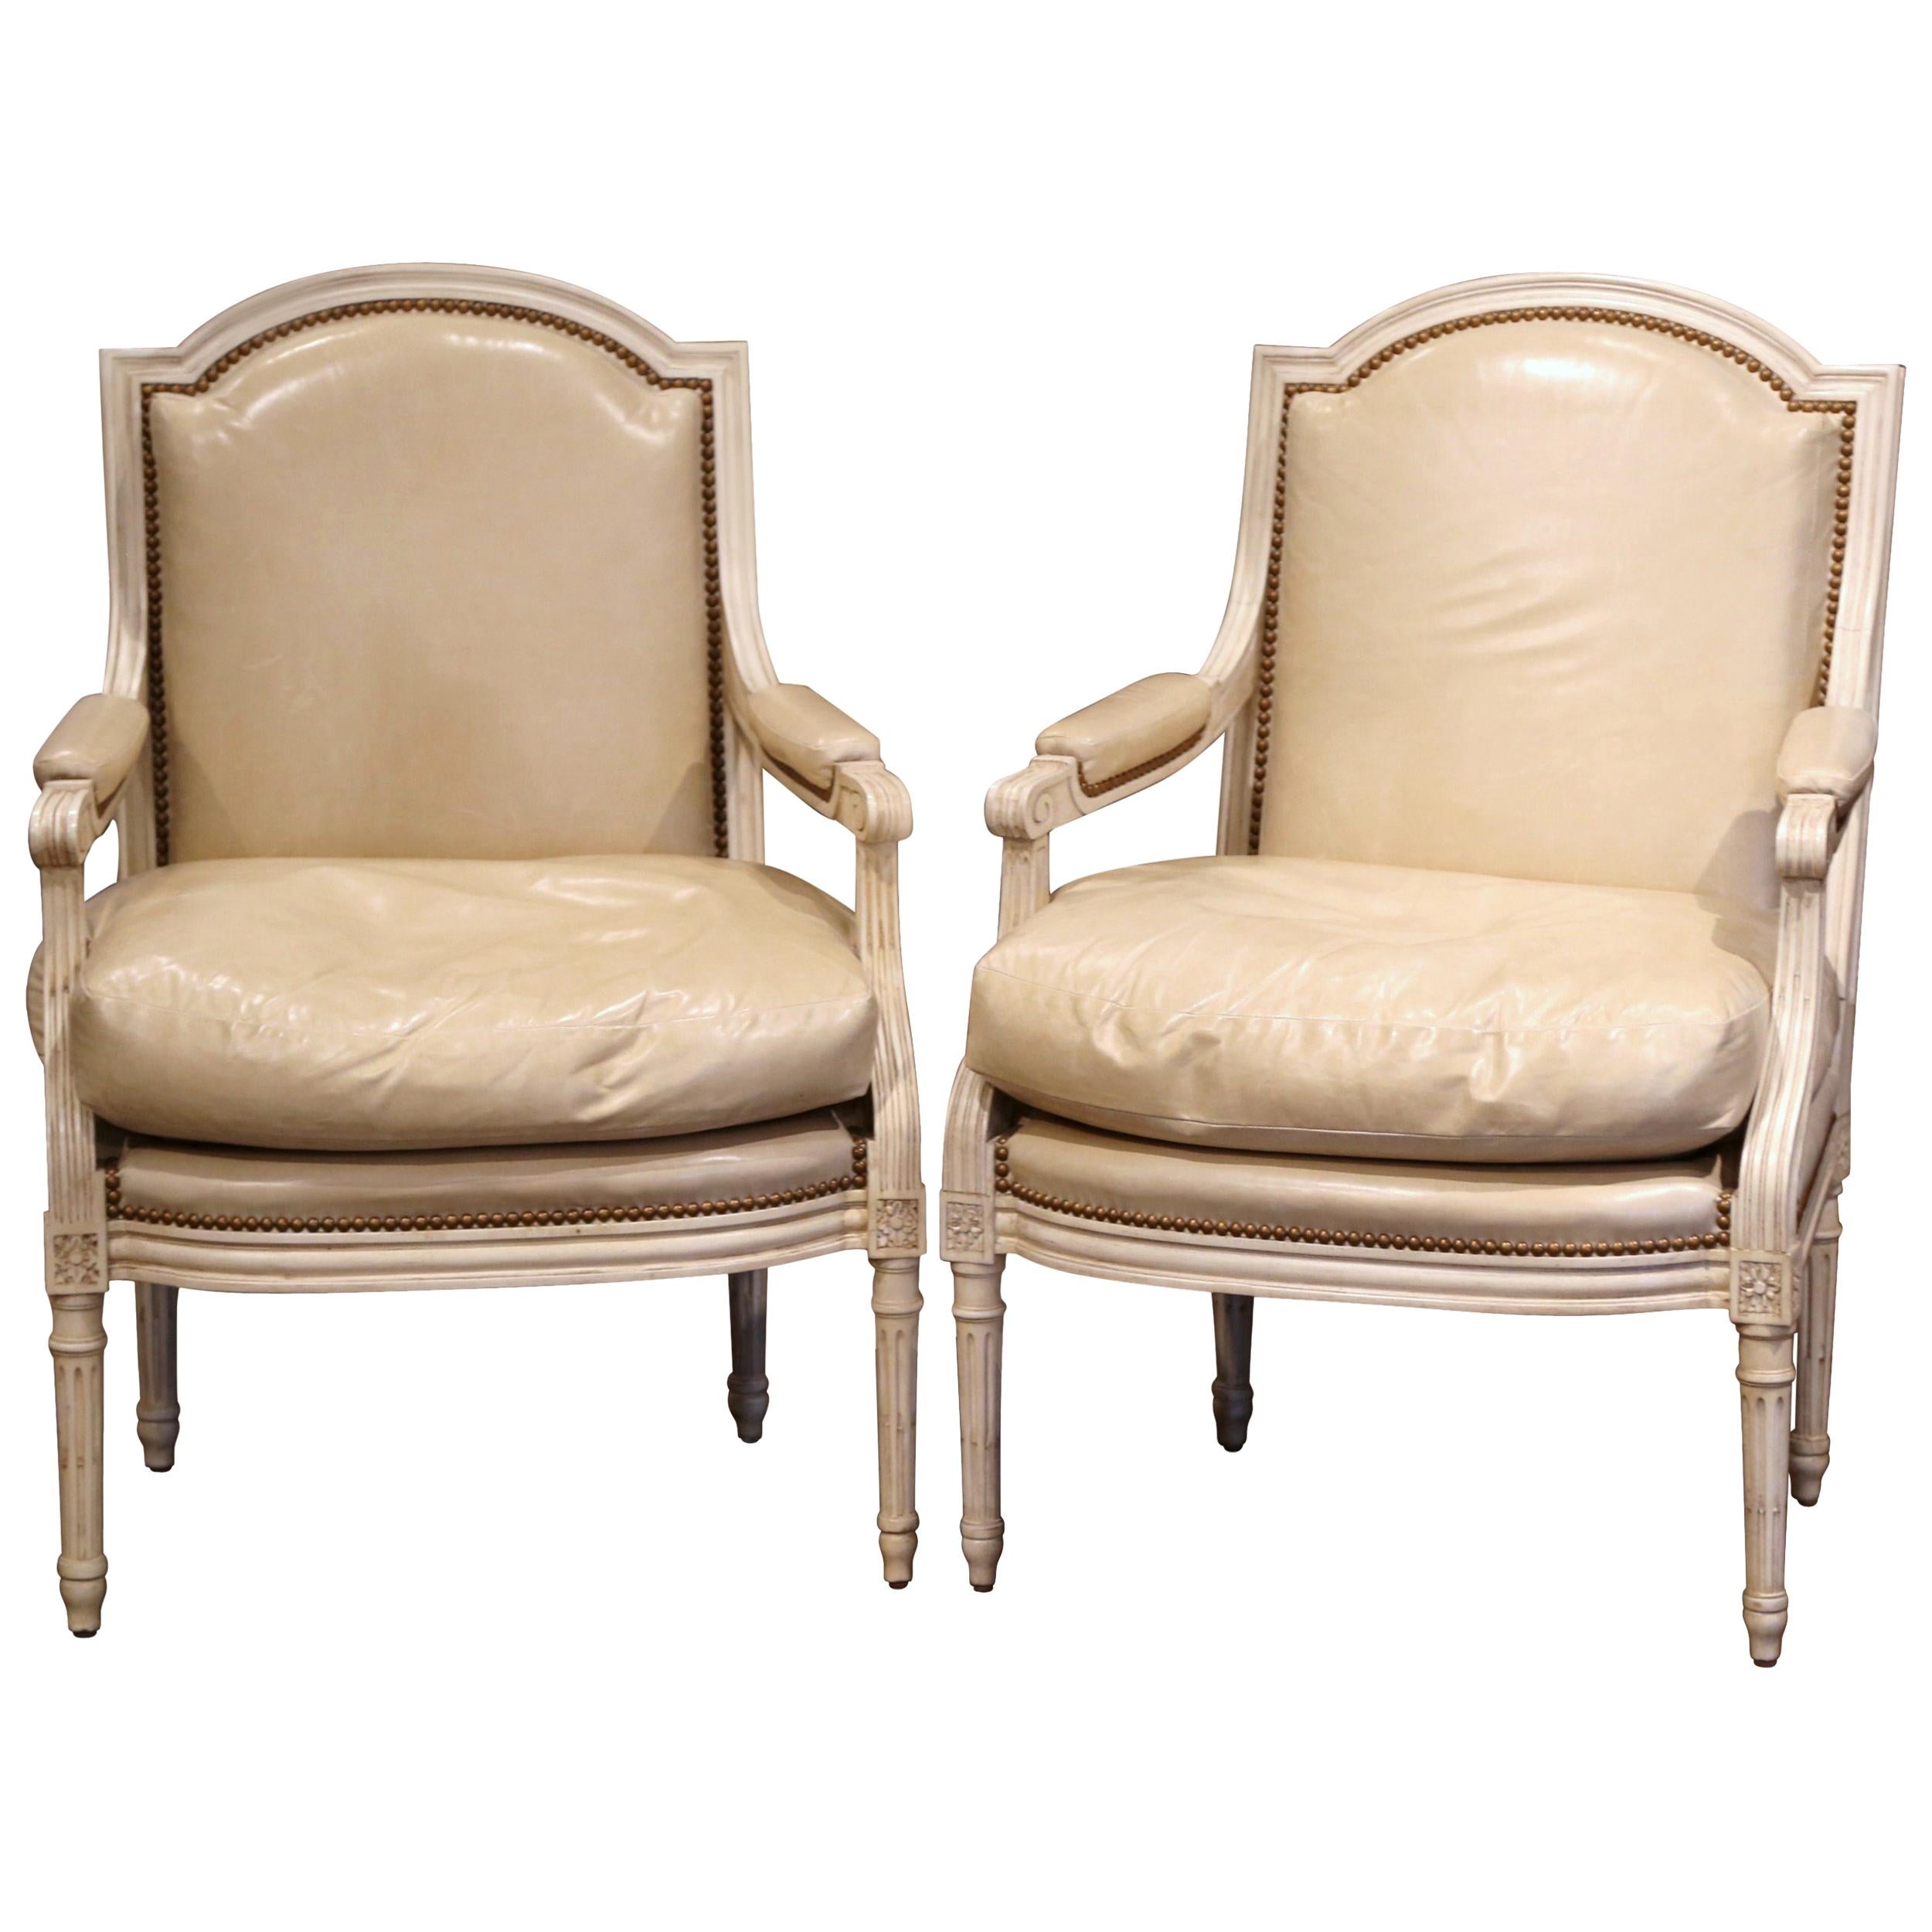 Pair of French Louis XVI Carved Painted Armchairs with Beige Leather Upholstery